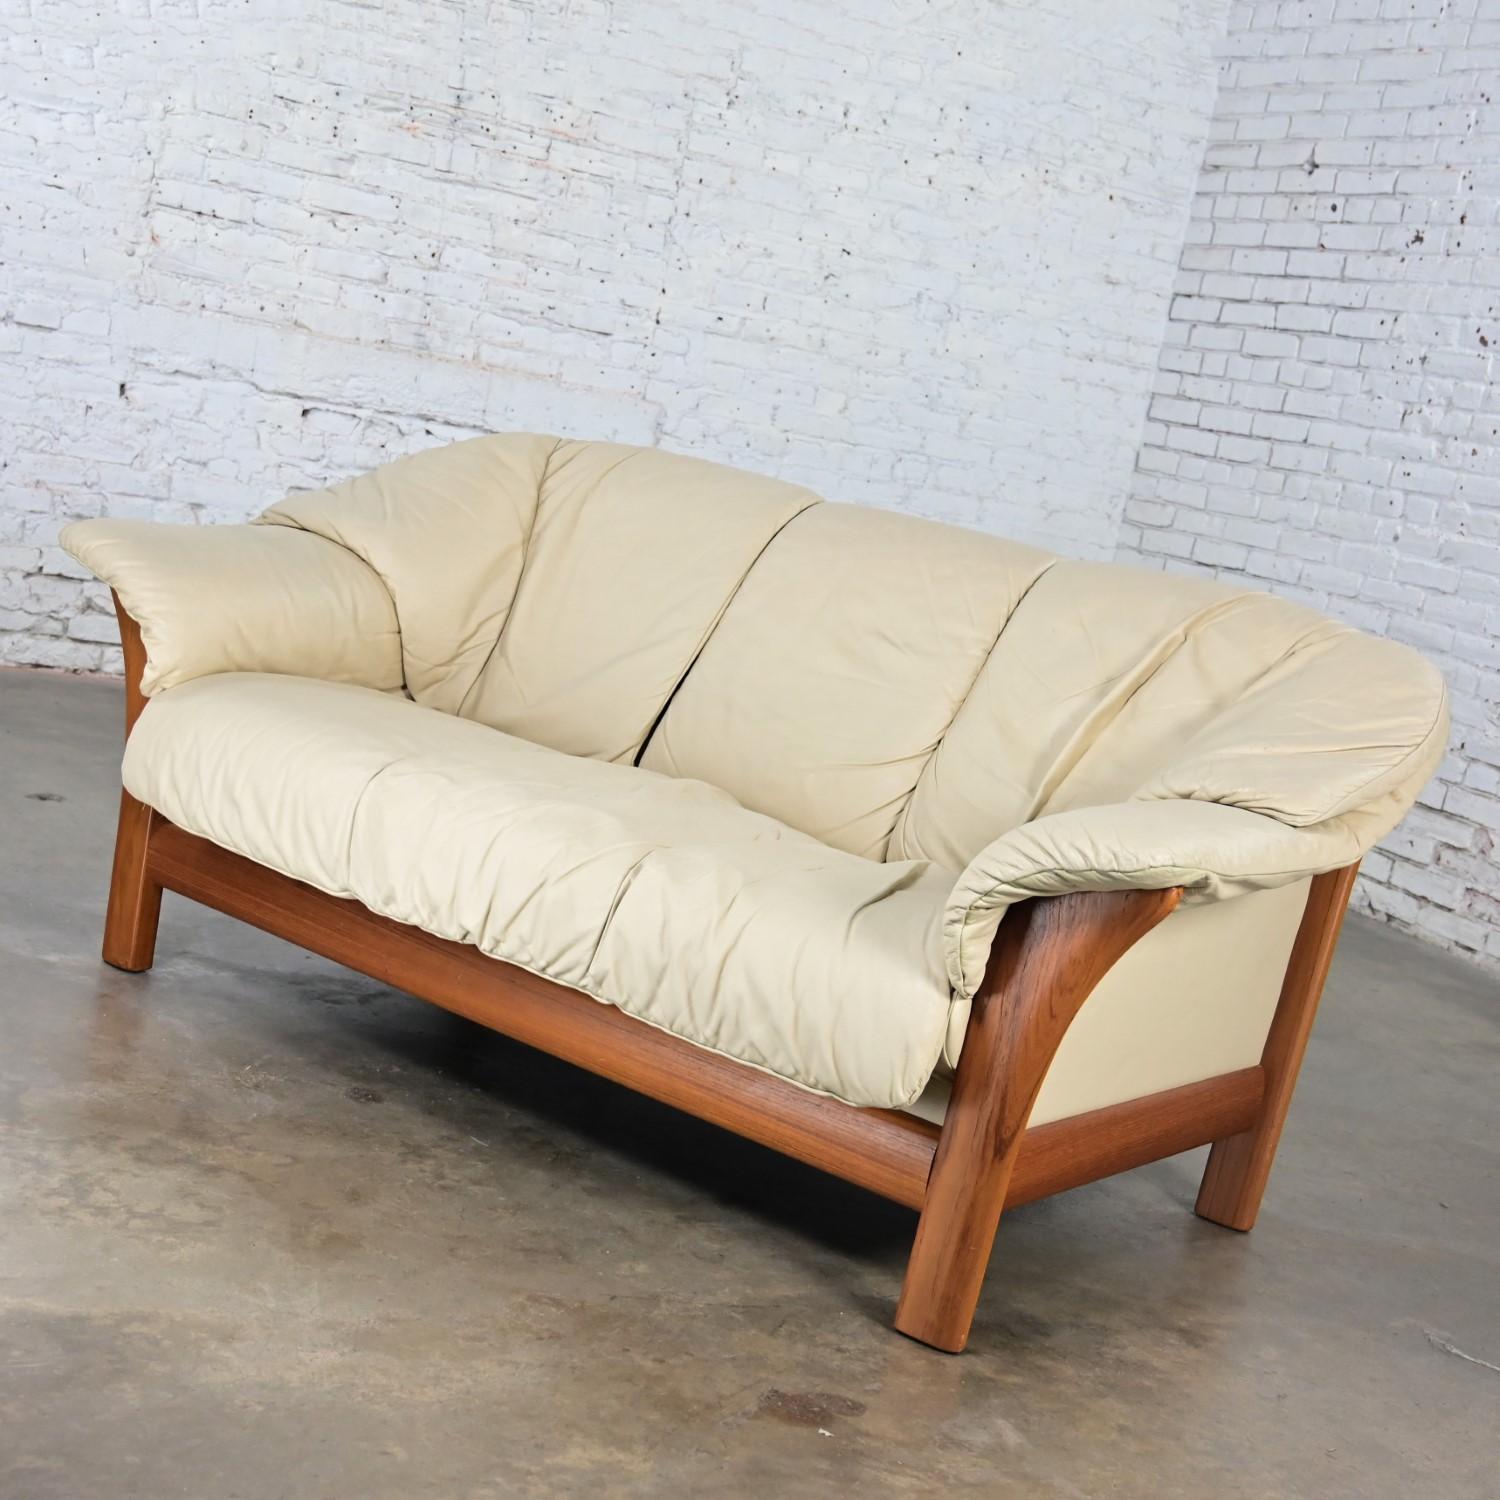 Scandinavian Modern Teak & Off White Leather Small Sofa Attributed to Ekornes In Good Condition For Sale In Topeka, KS